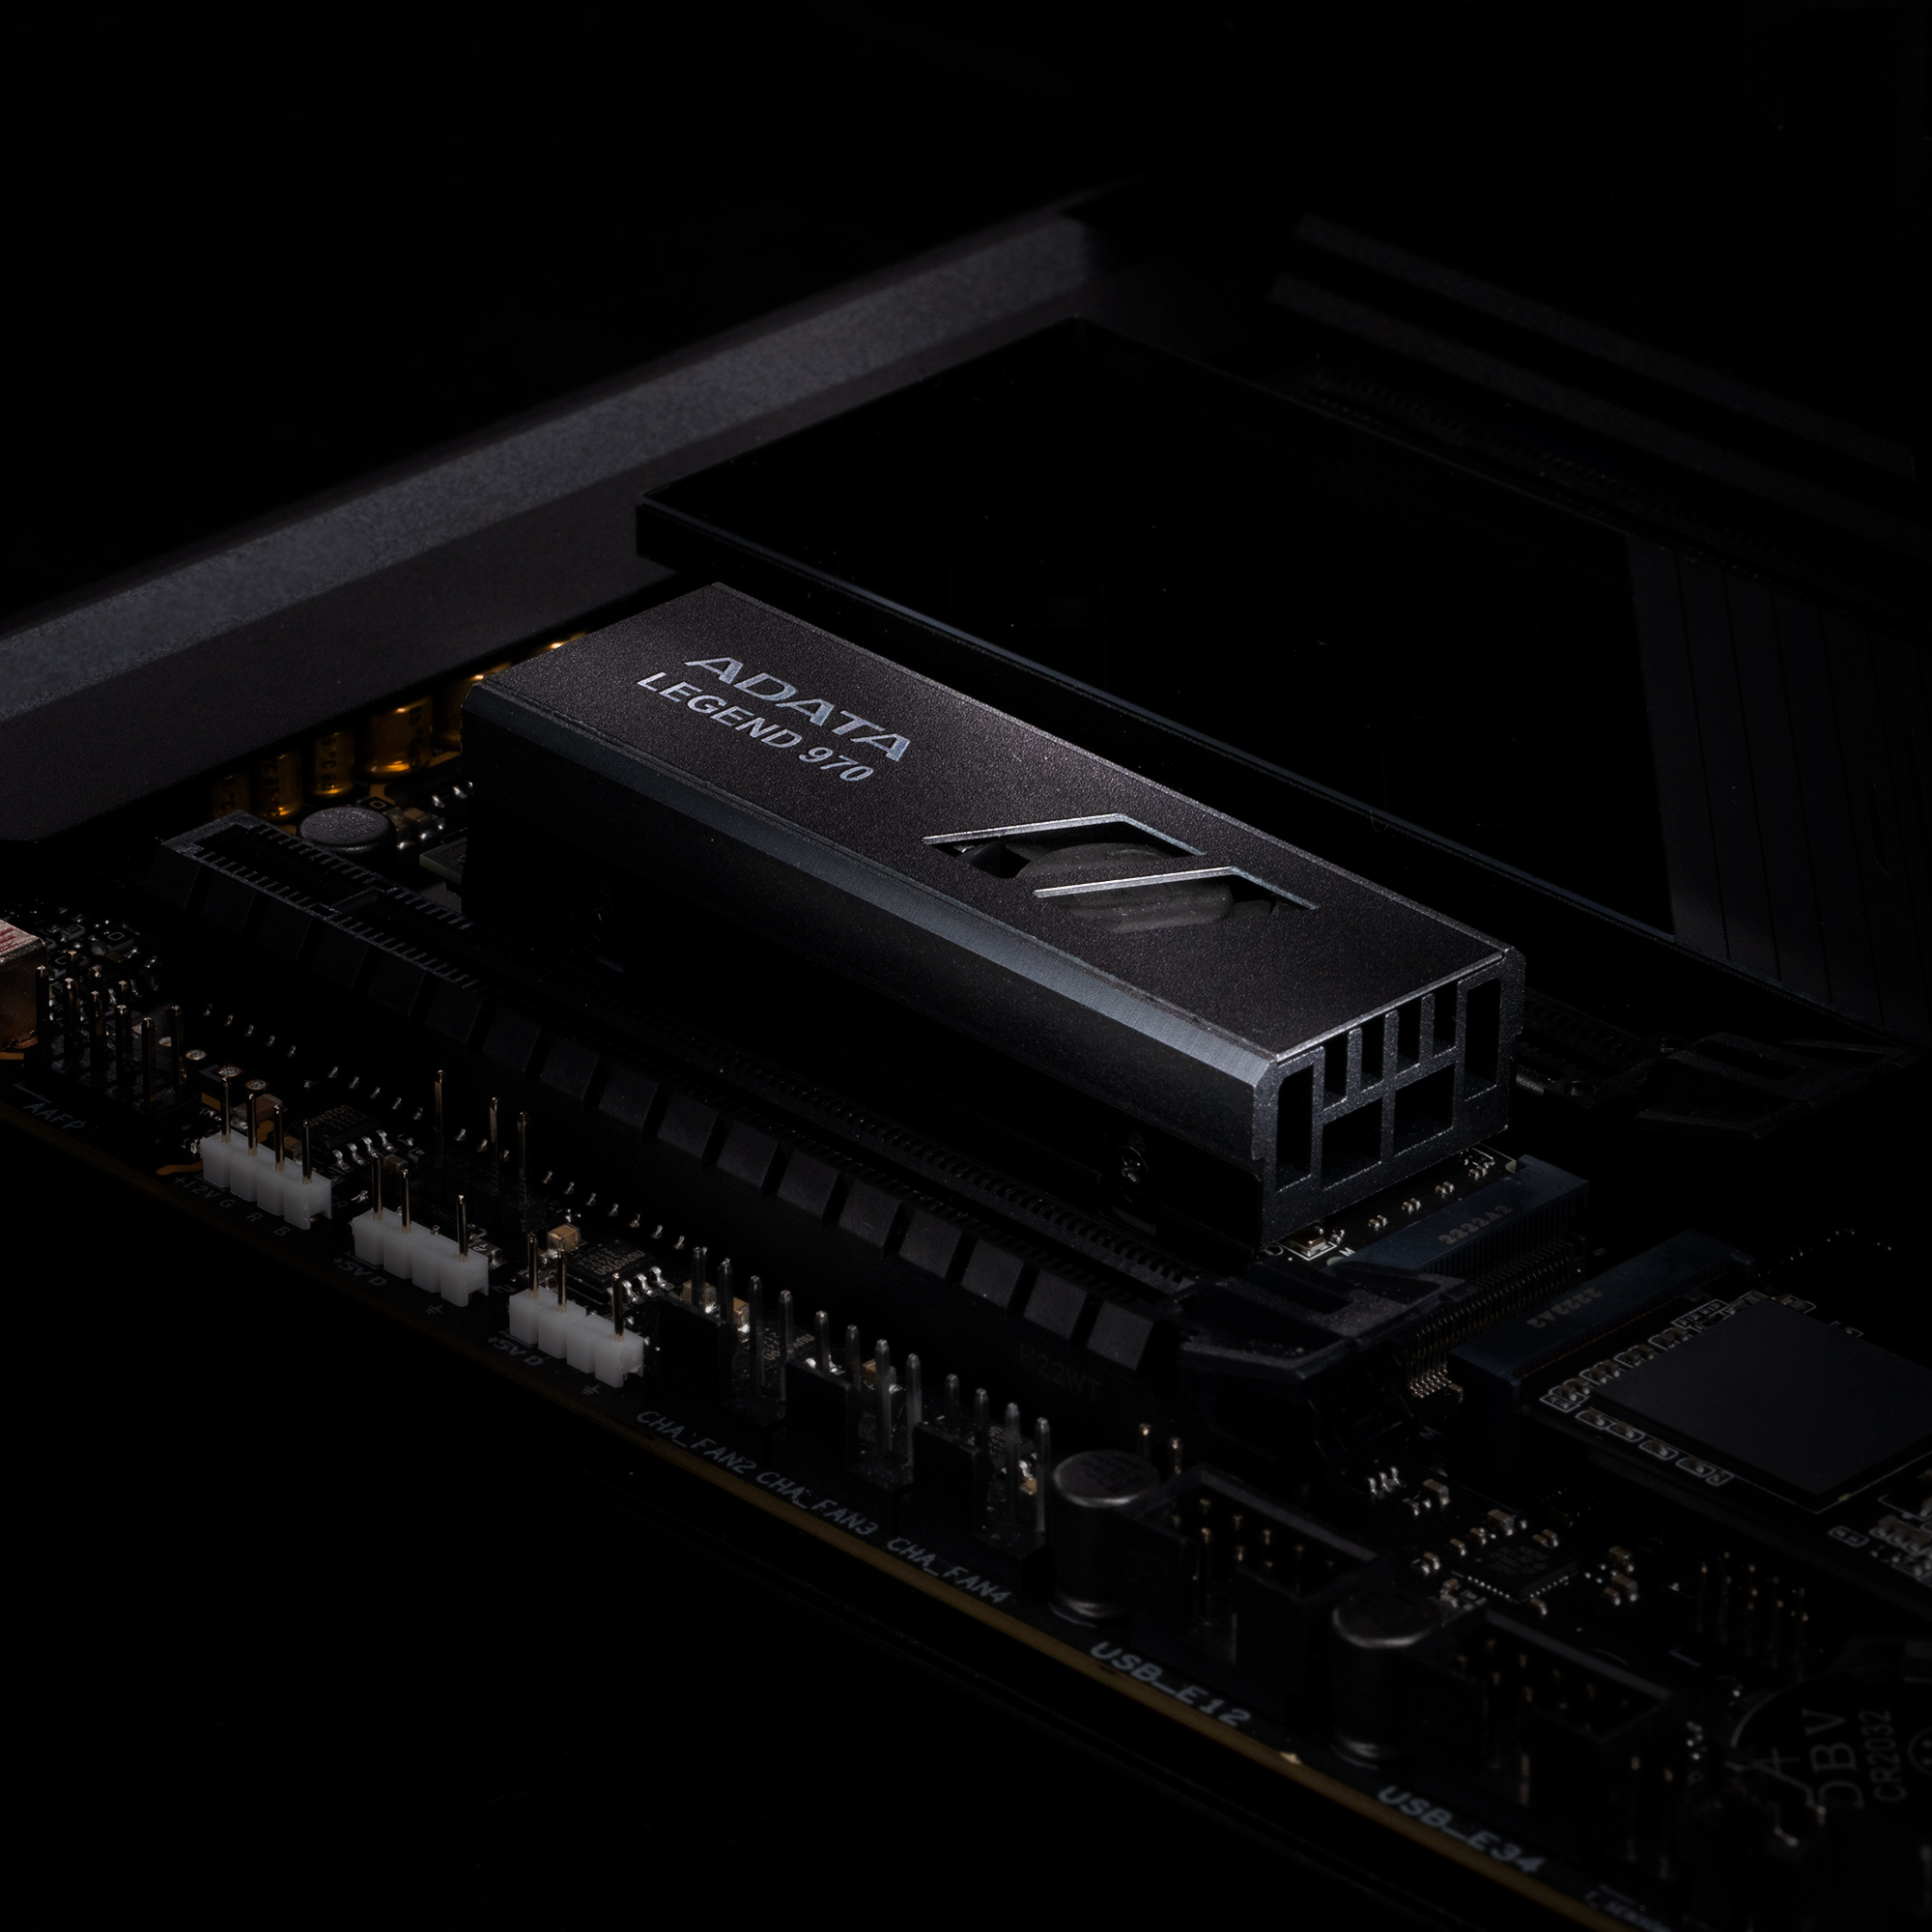 LEGEND 970 PCIe NVMe M.2 Solid State Drive｜ADATA (Global)